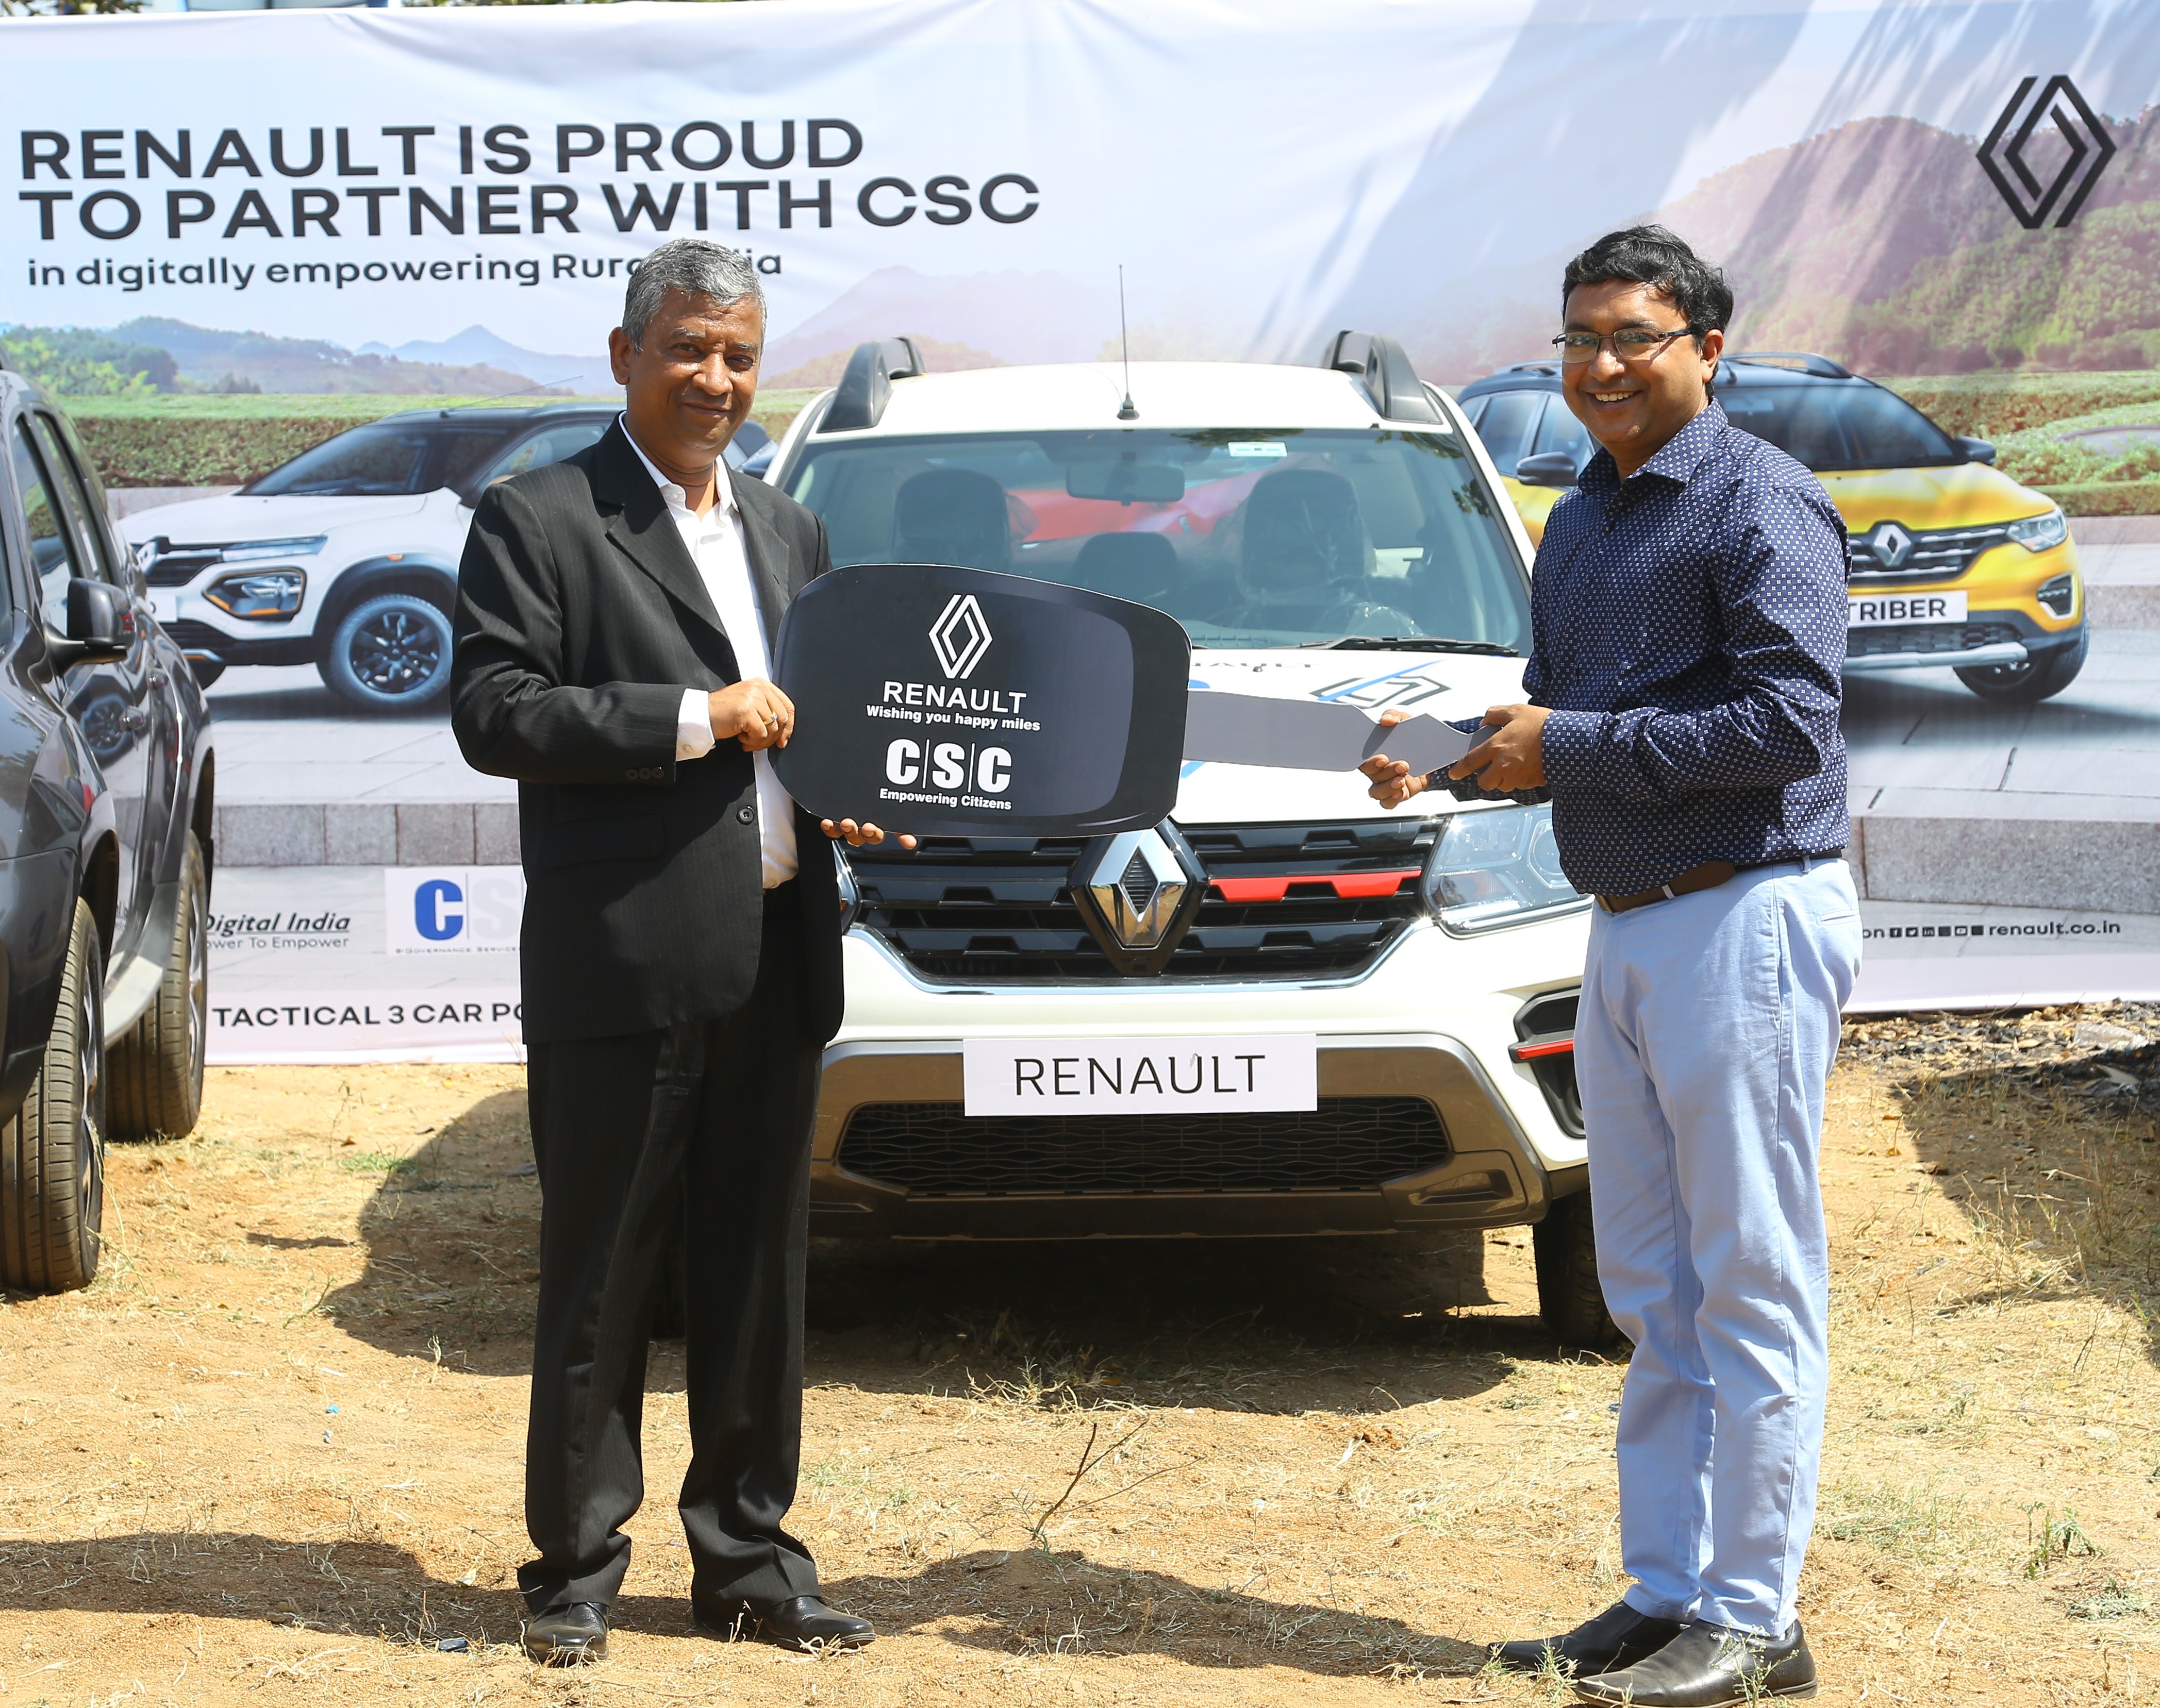 renault-india-joins-hands-with-csc-for-digital-empowerment-in-rural-areas